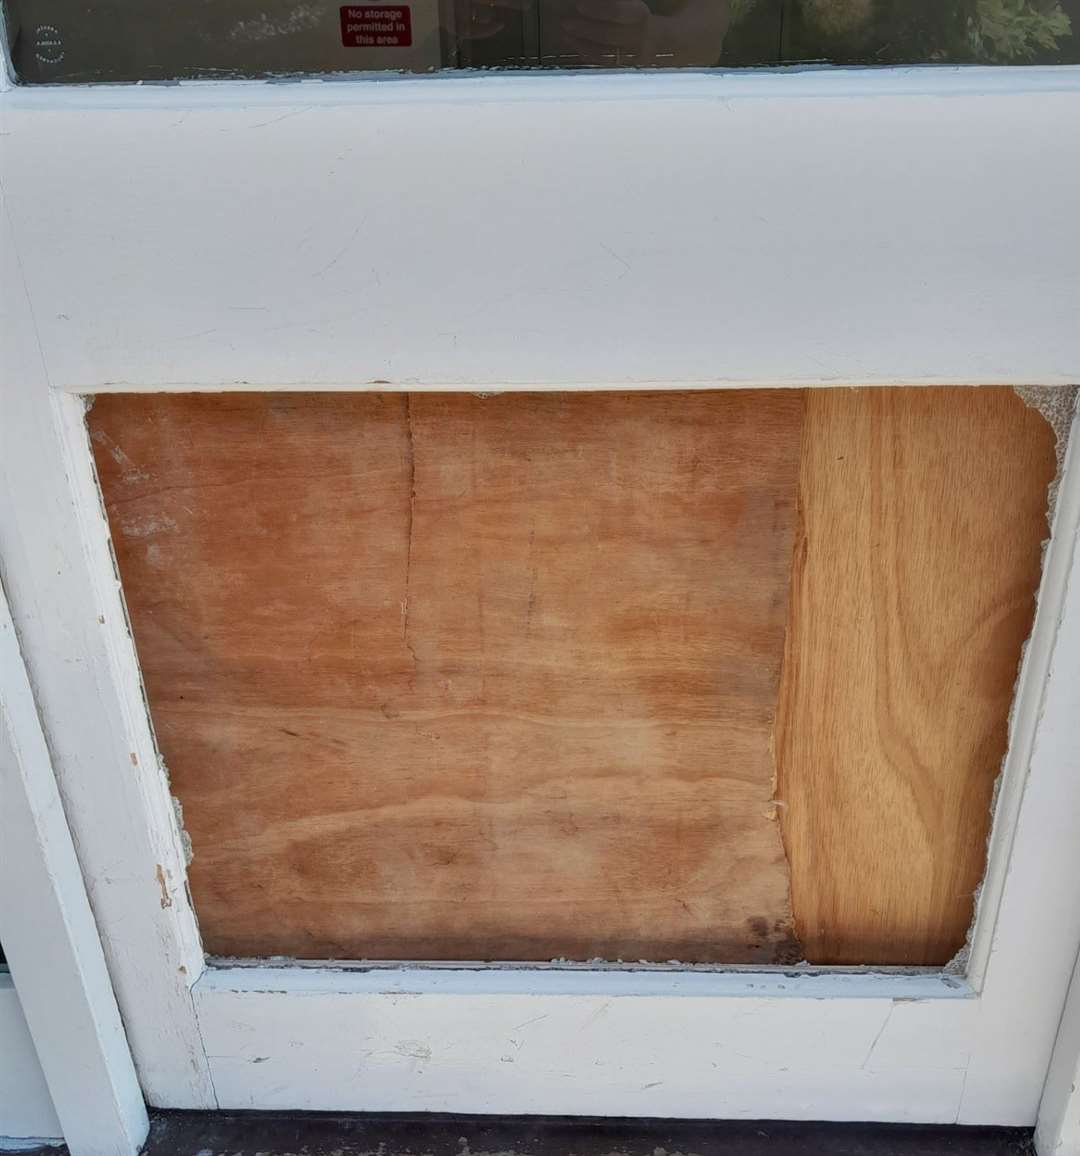 A broken glass panel and its temporary repair.